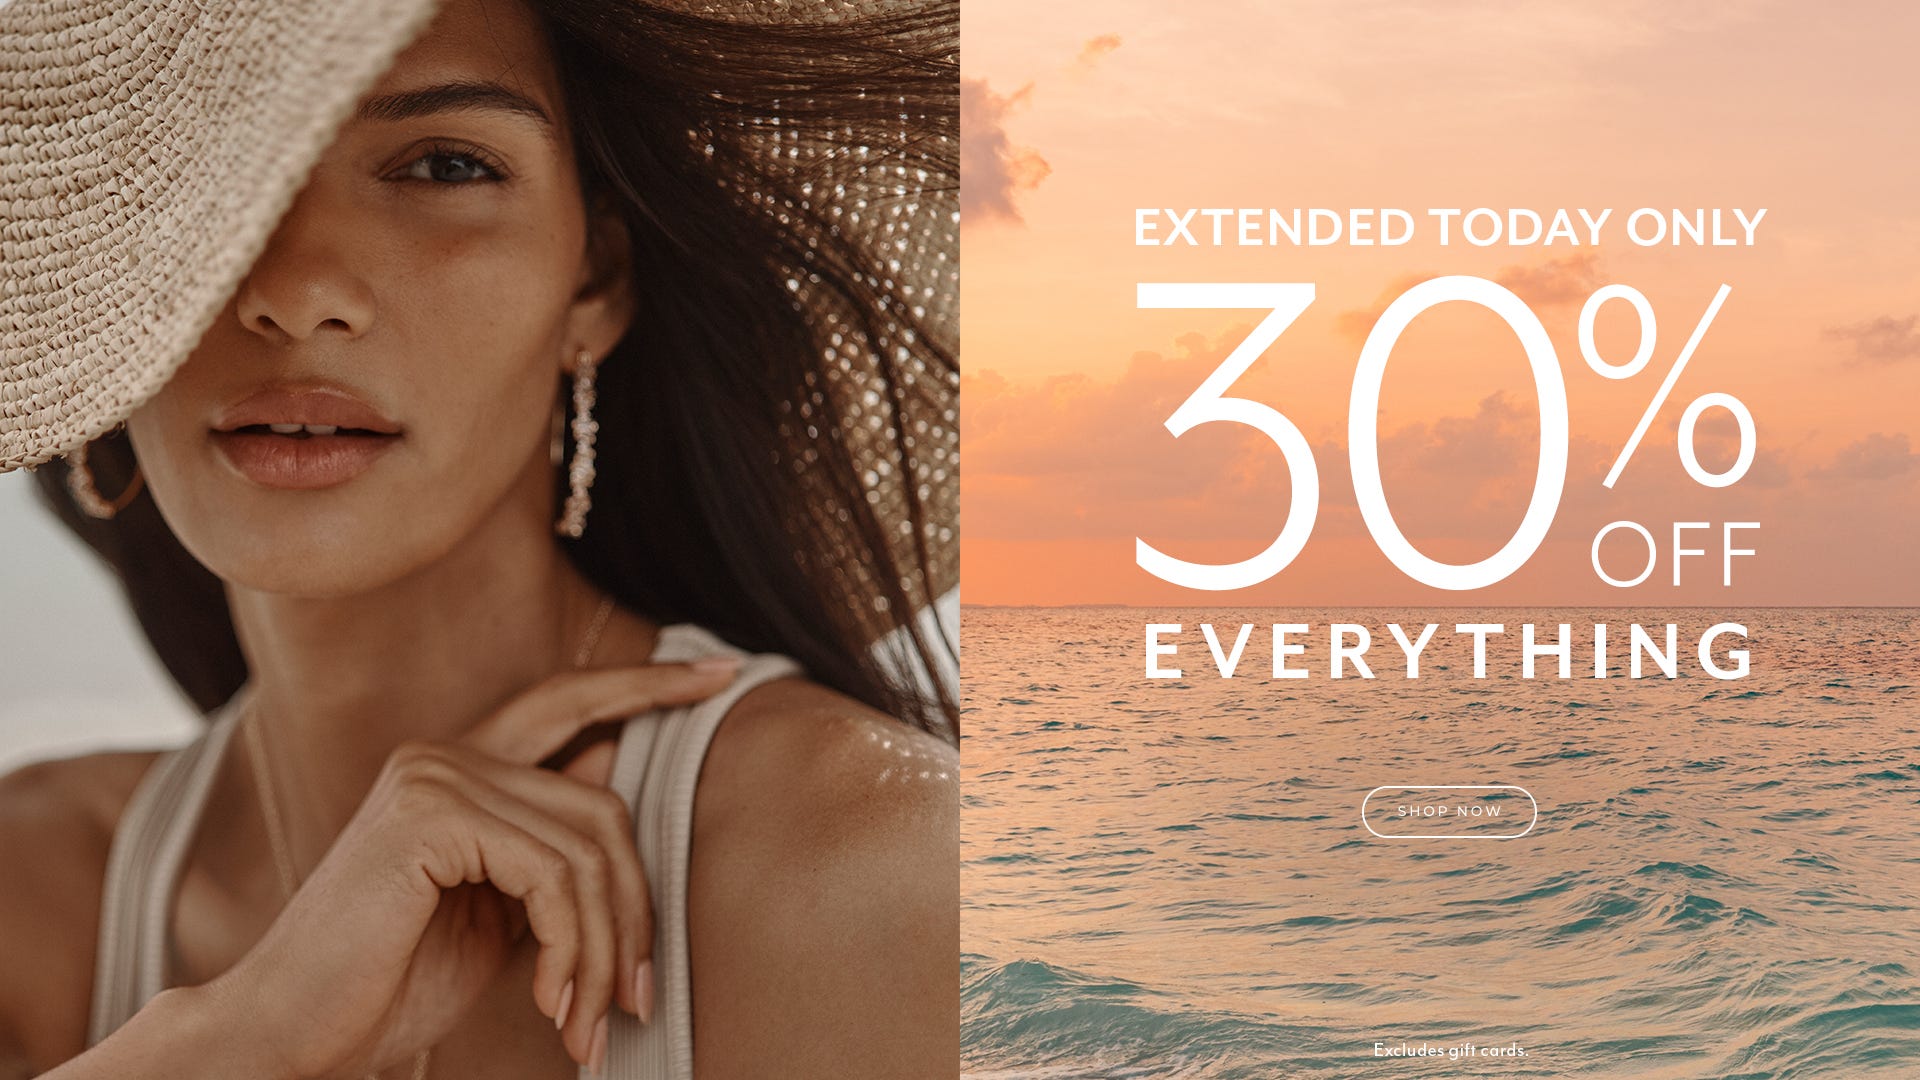 Extended Today Only 30% Off Everything